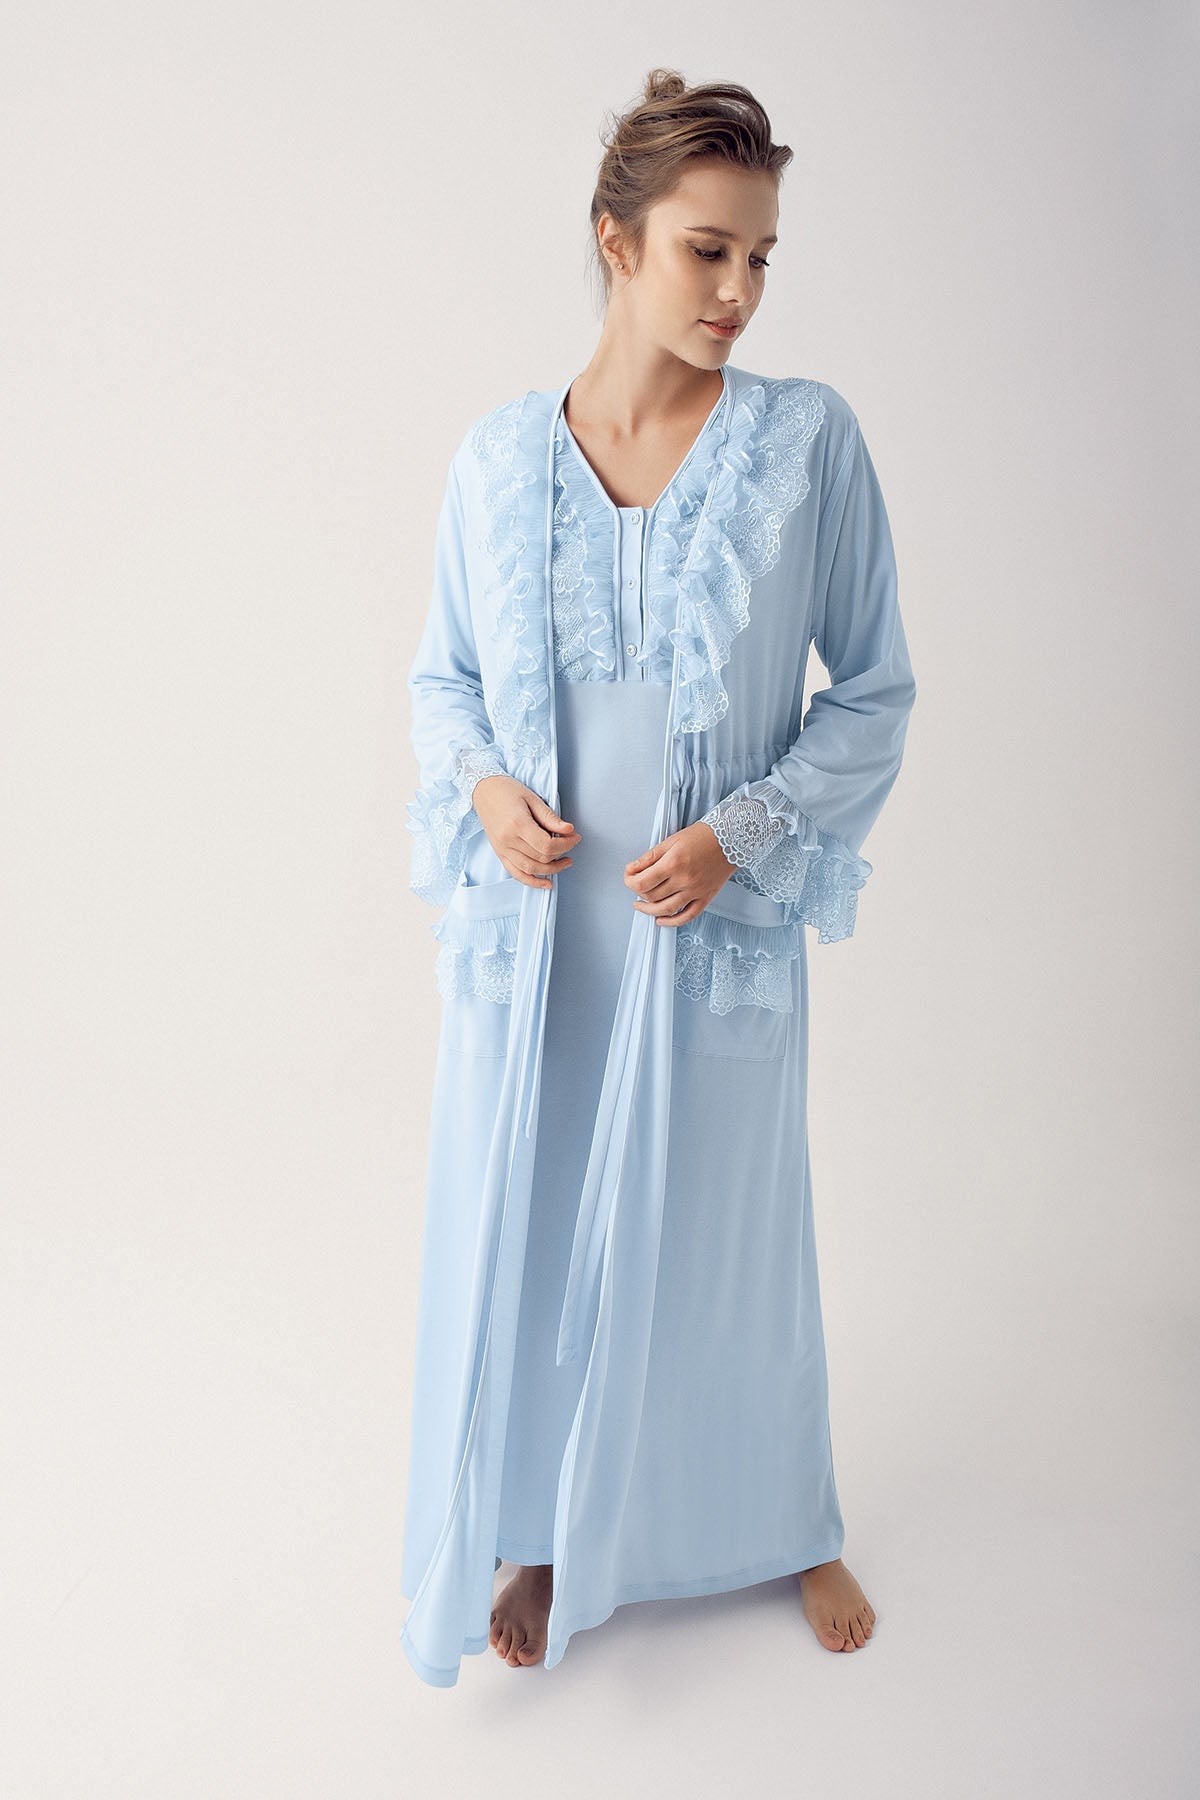 Leaf Lace Maternity & Nursing Nightgown With Robe Blue - 14403